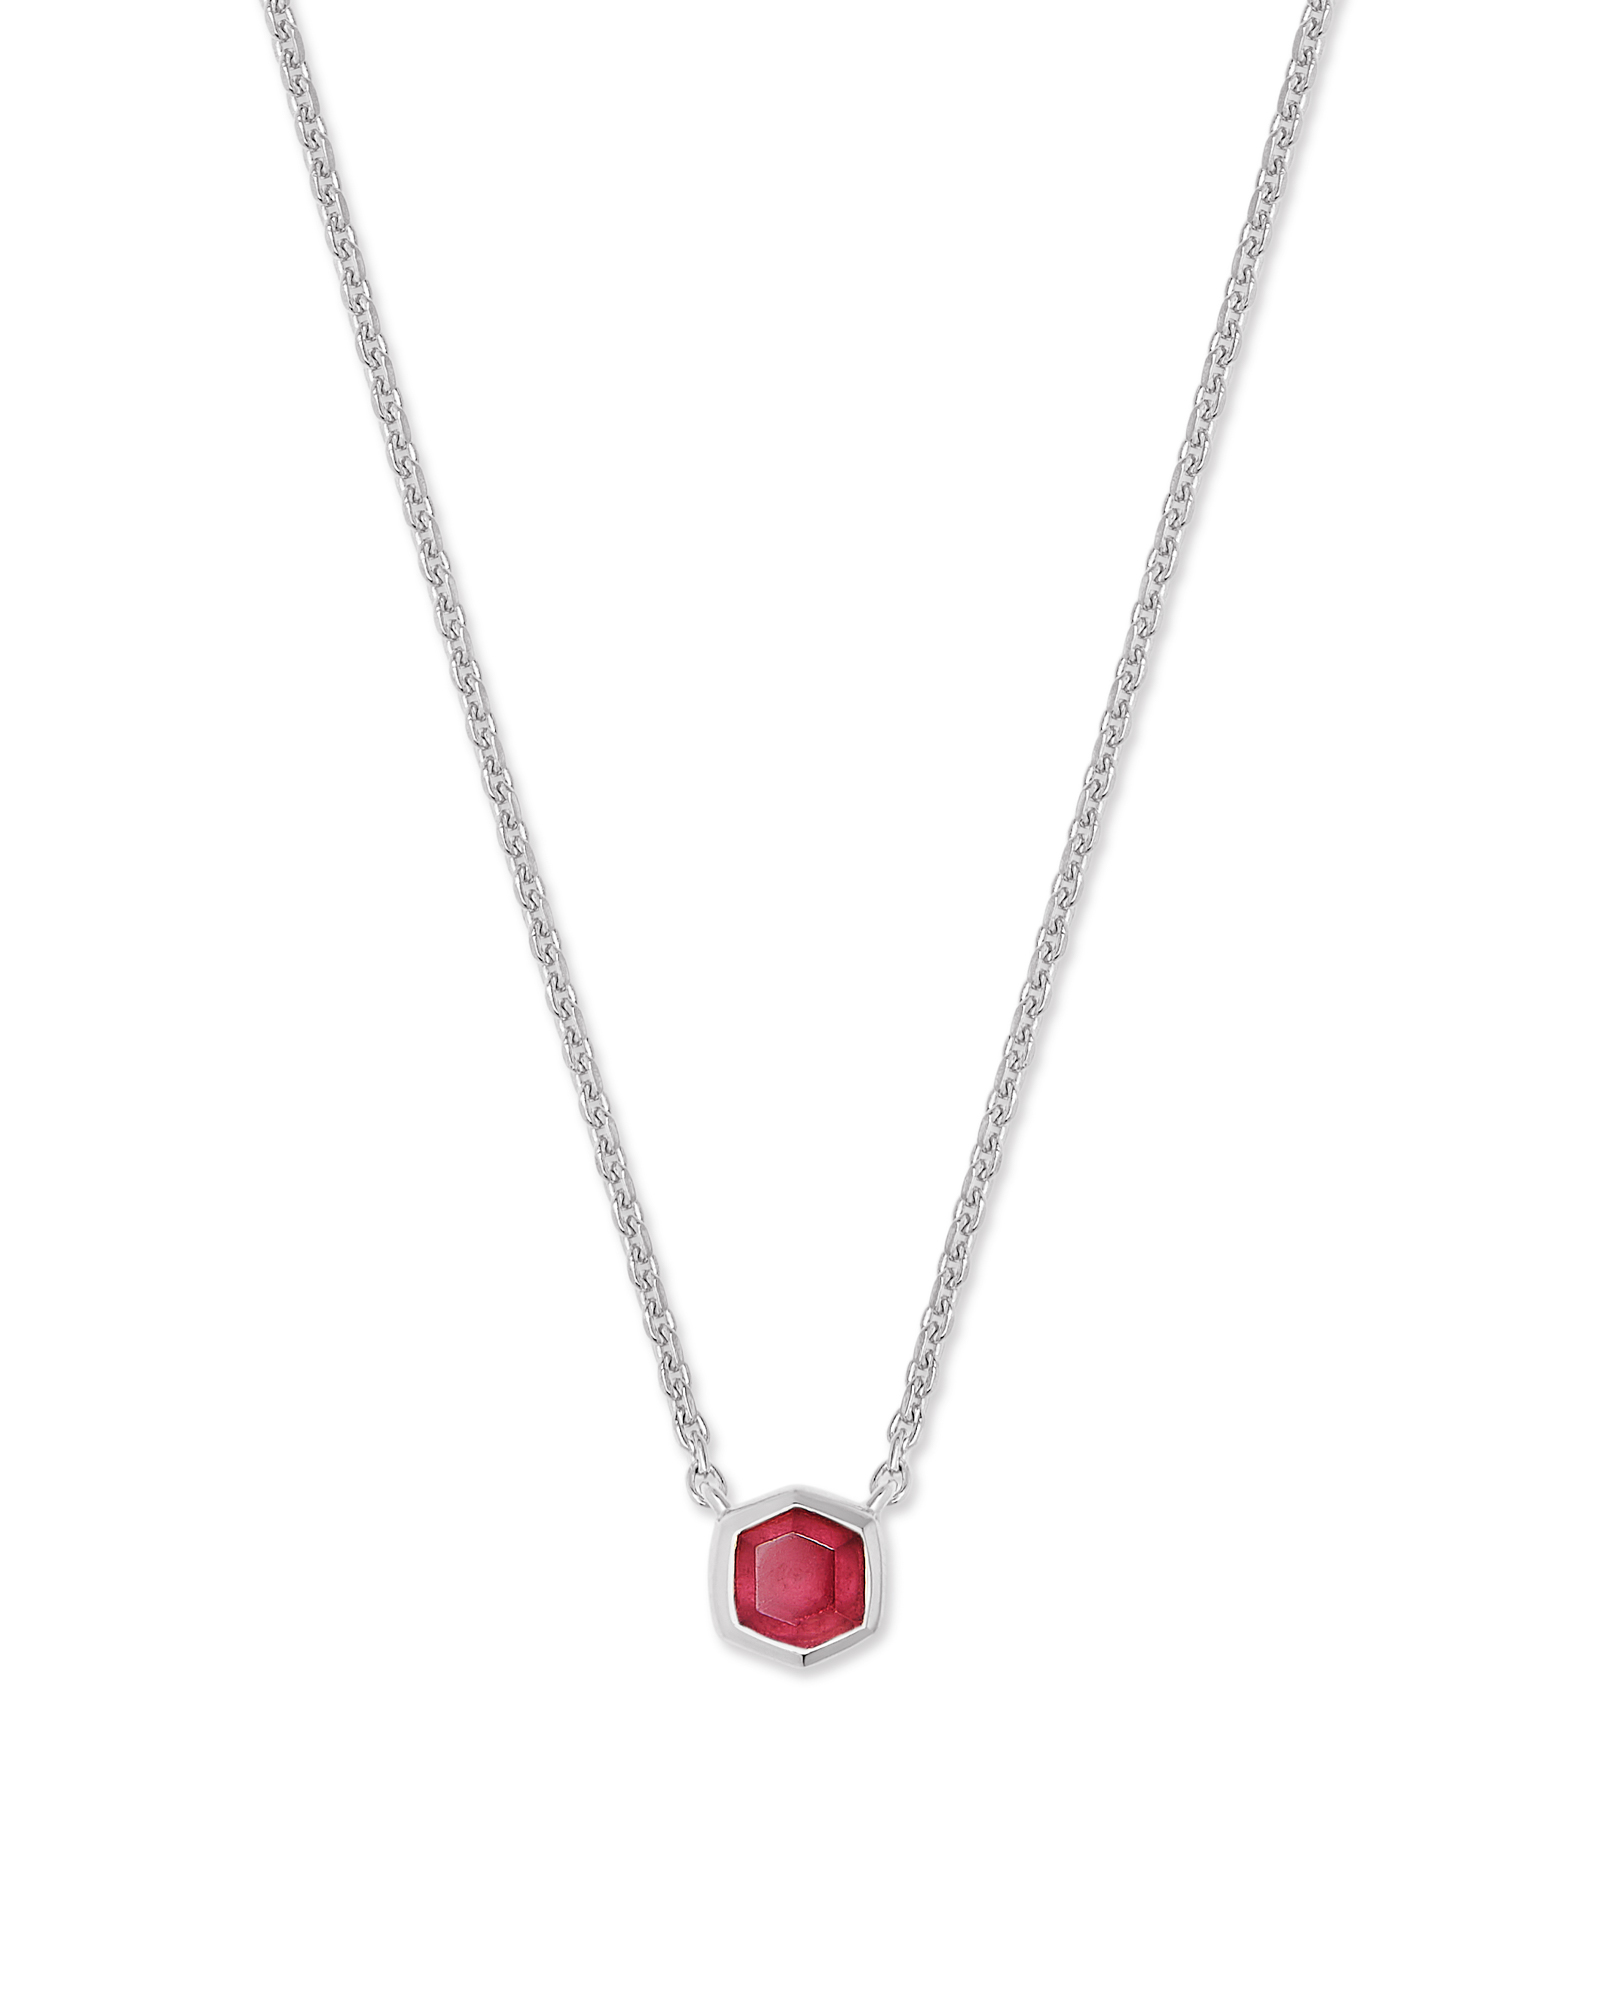 Kendra Scott Ari Heart Gold Pave Pendant Necklace in Red Crystal – Ima's  Fashions Inc.